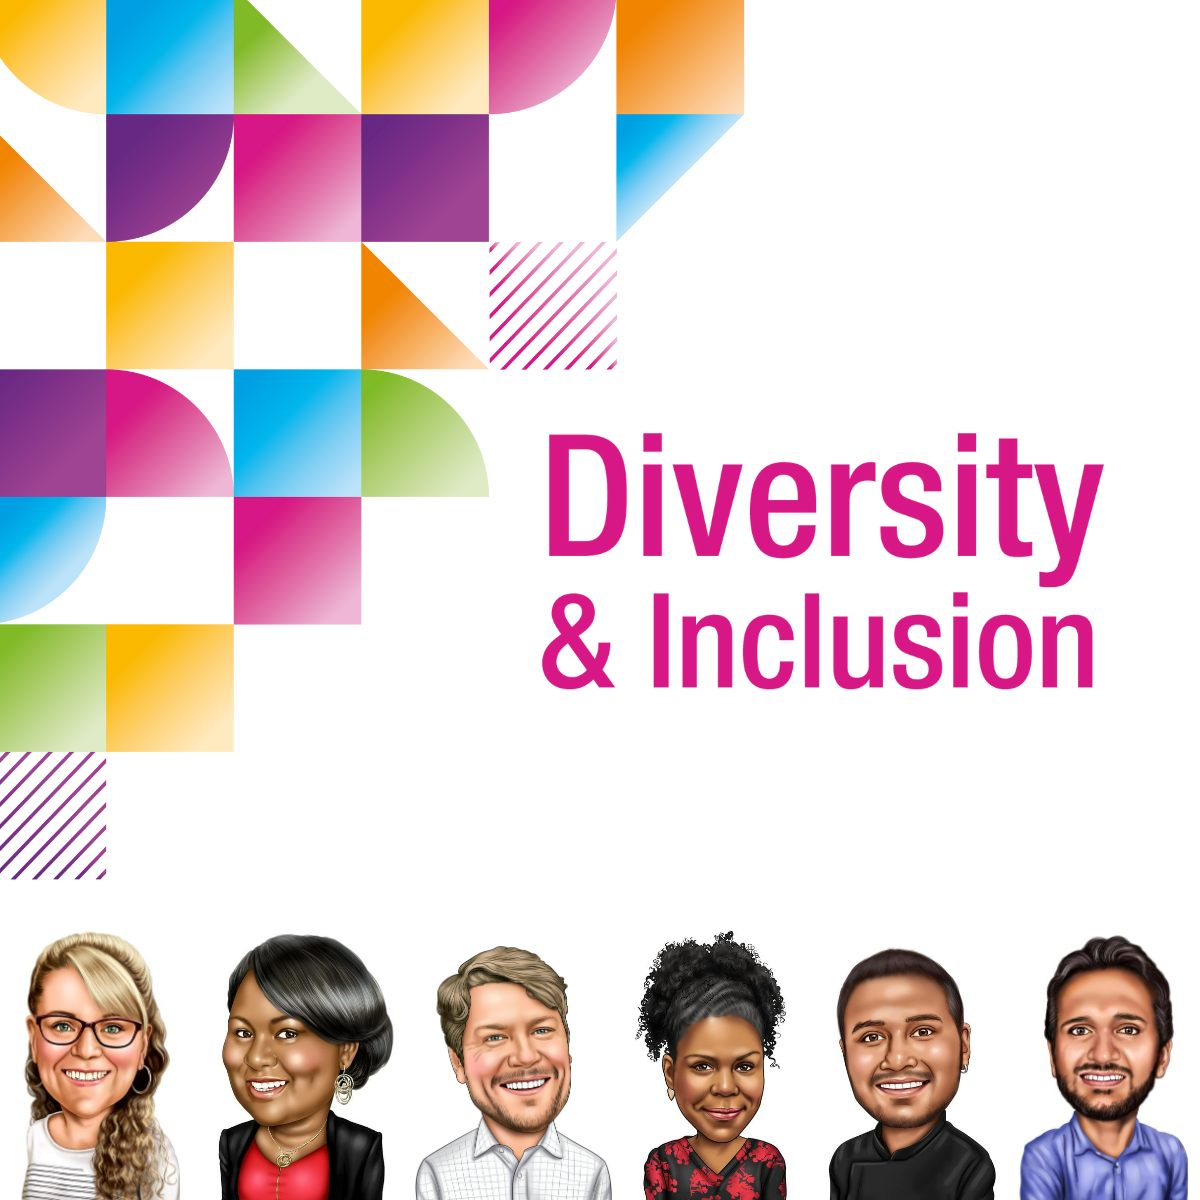 NEW PRODUCT LAUNCH: Diversity & Inclusion™ Training Activity